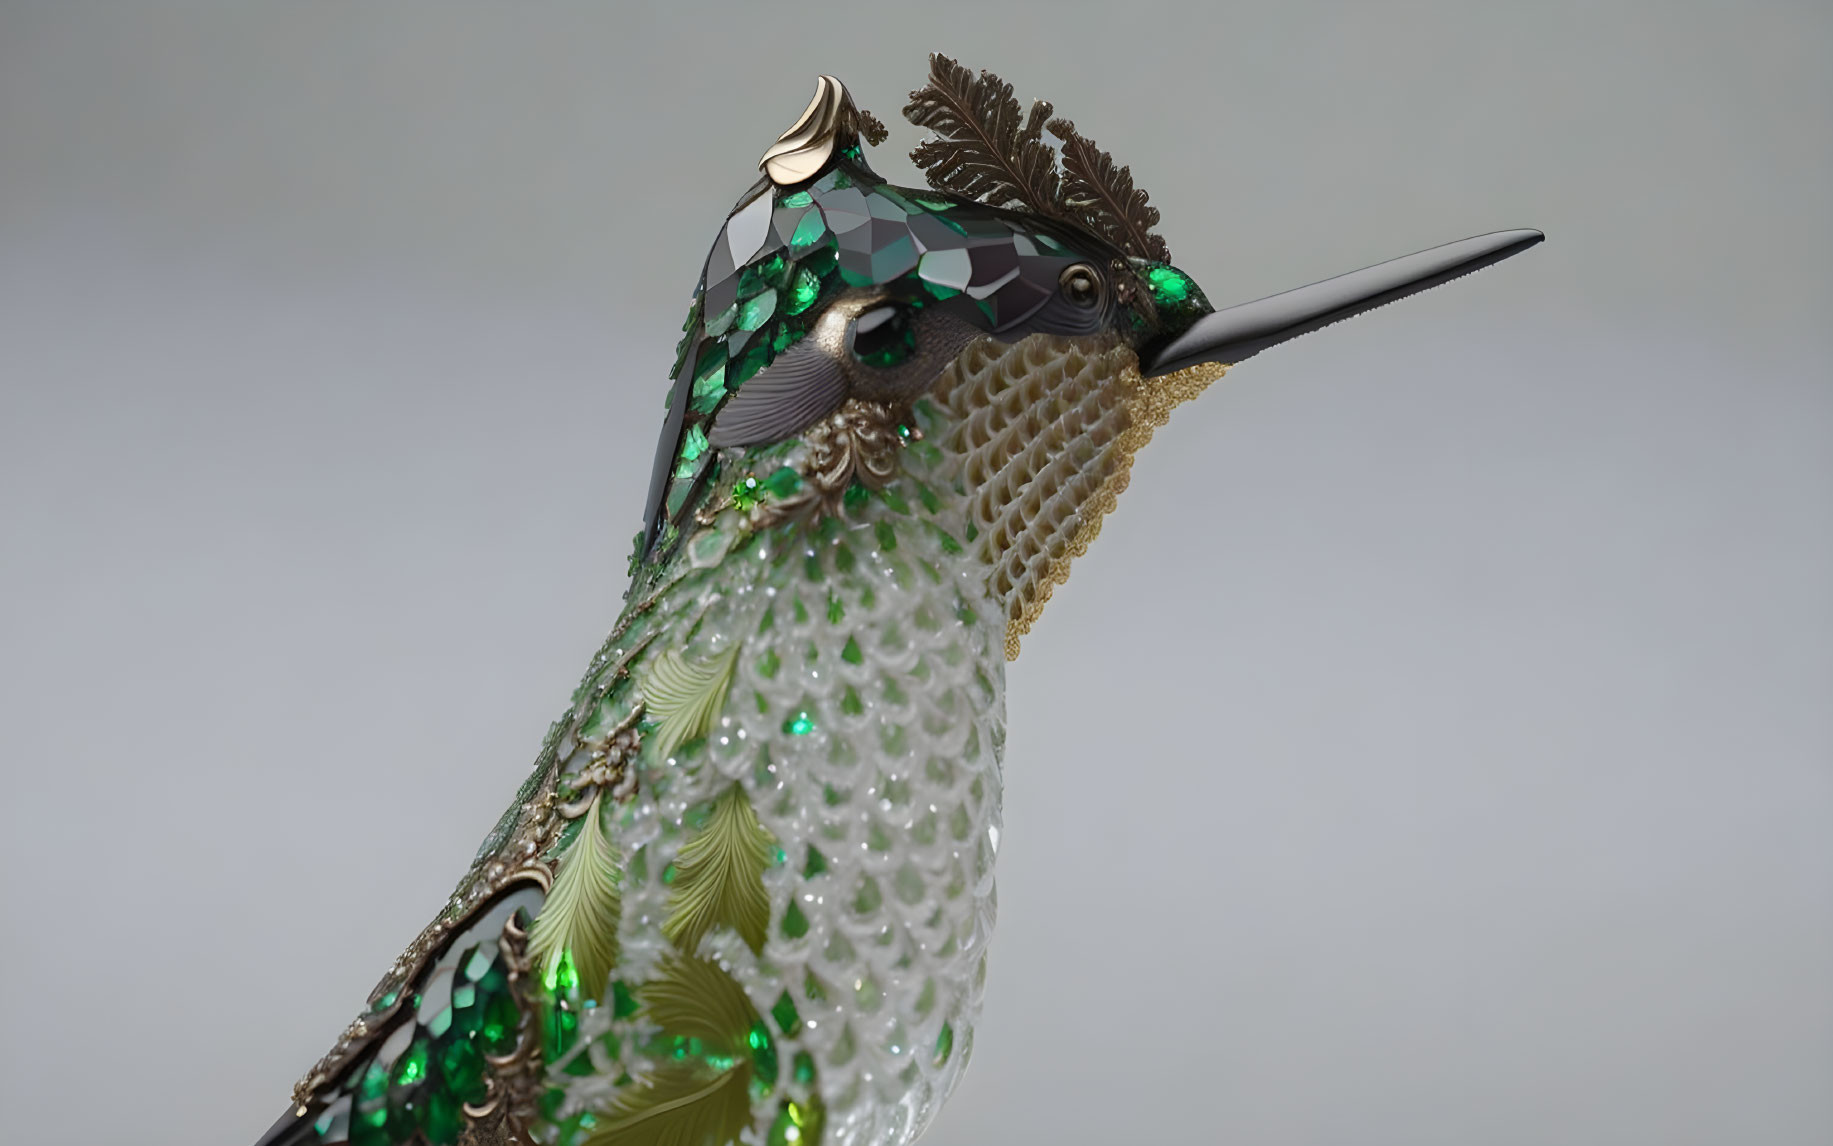 Intricately designed hummingbird with shiny green and white beads on grey background